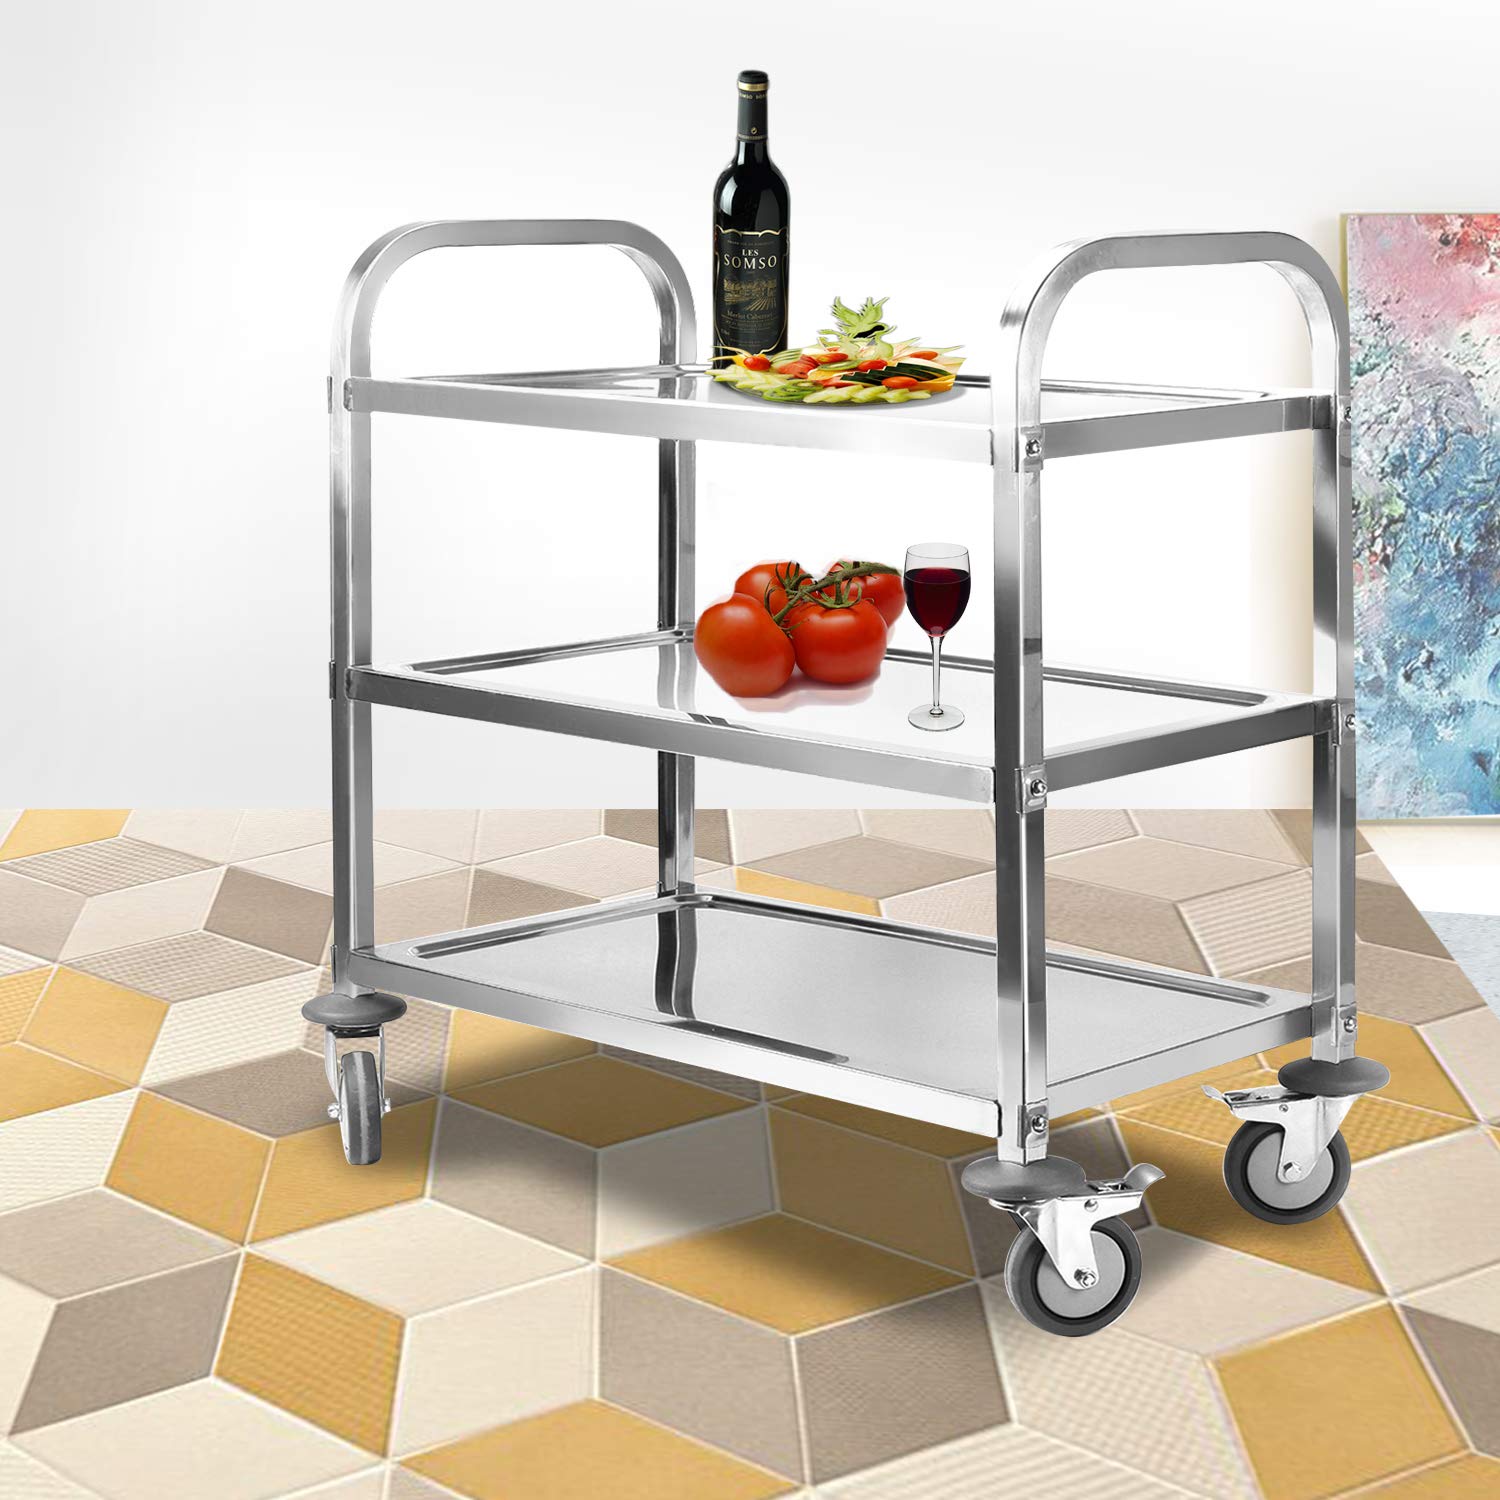 tonchean Large 3 Tier Stainless Steel Cart Kitchen Trolley Cart Serving Cart 37.4 x 19.7 x 37.4 Inch Kitchen Utility Rolling Cart Service Catering Storage Cart with Locking Wheels